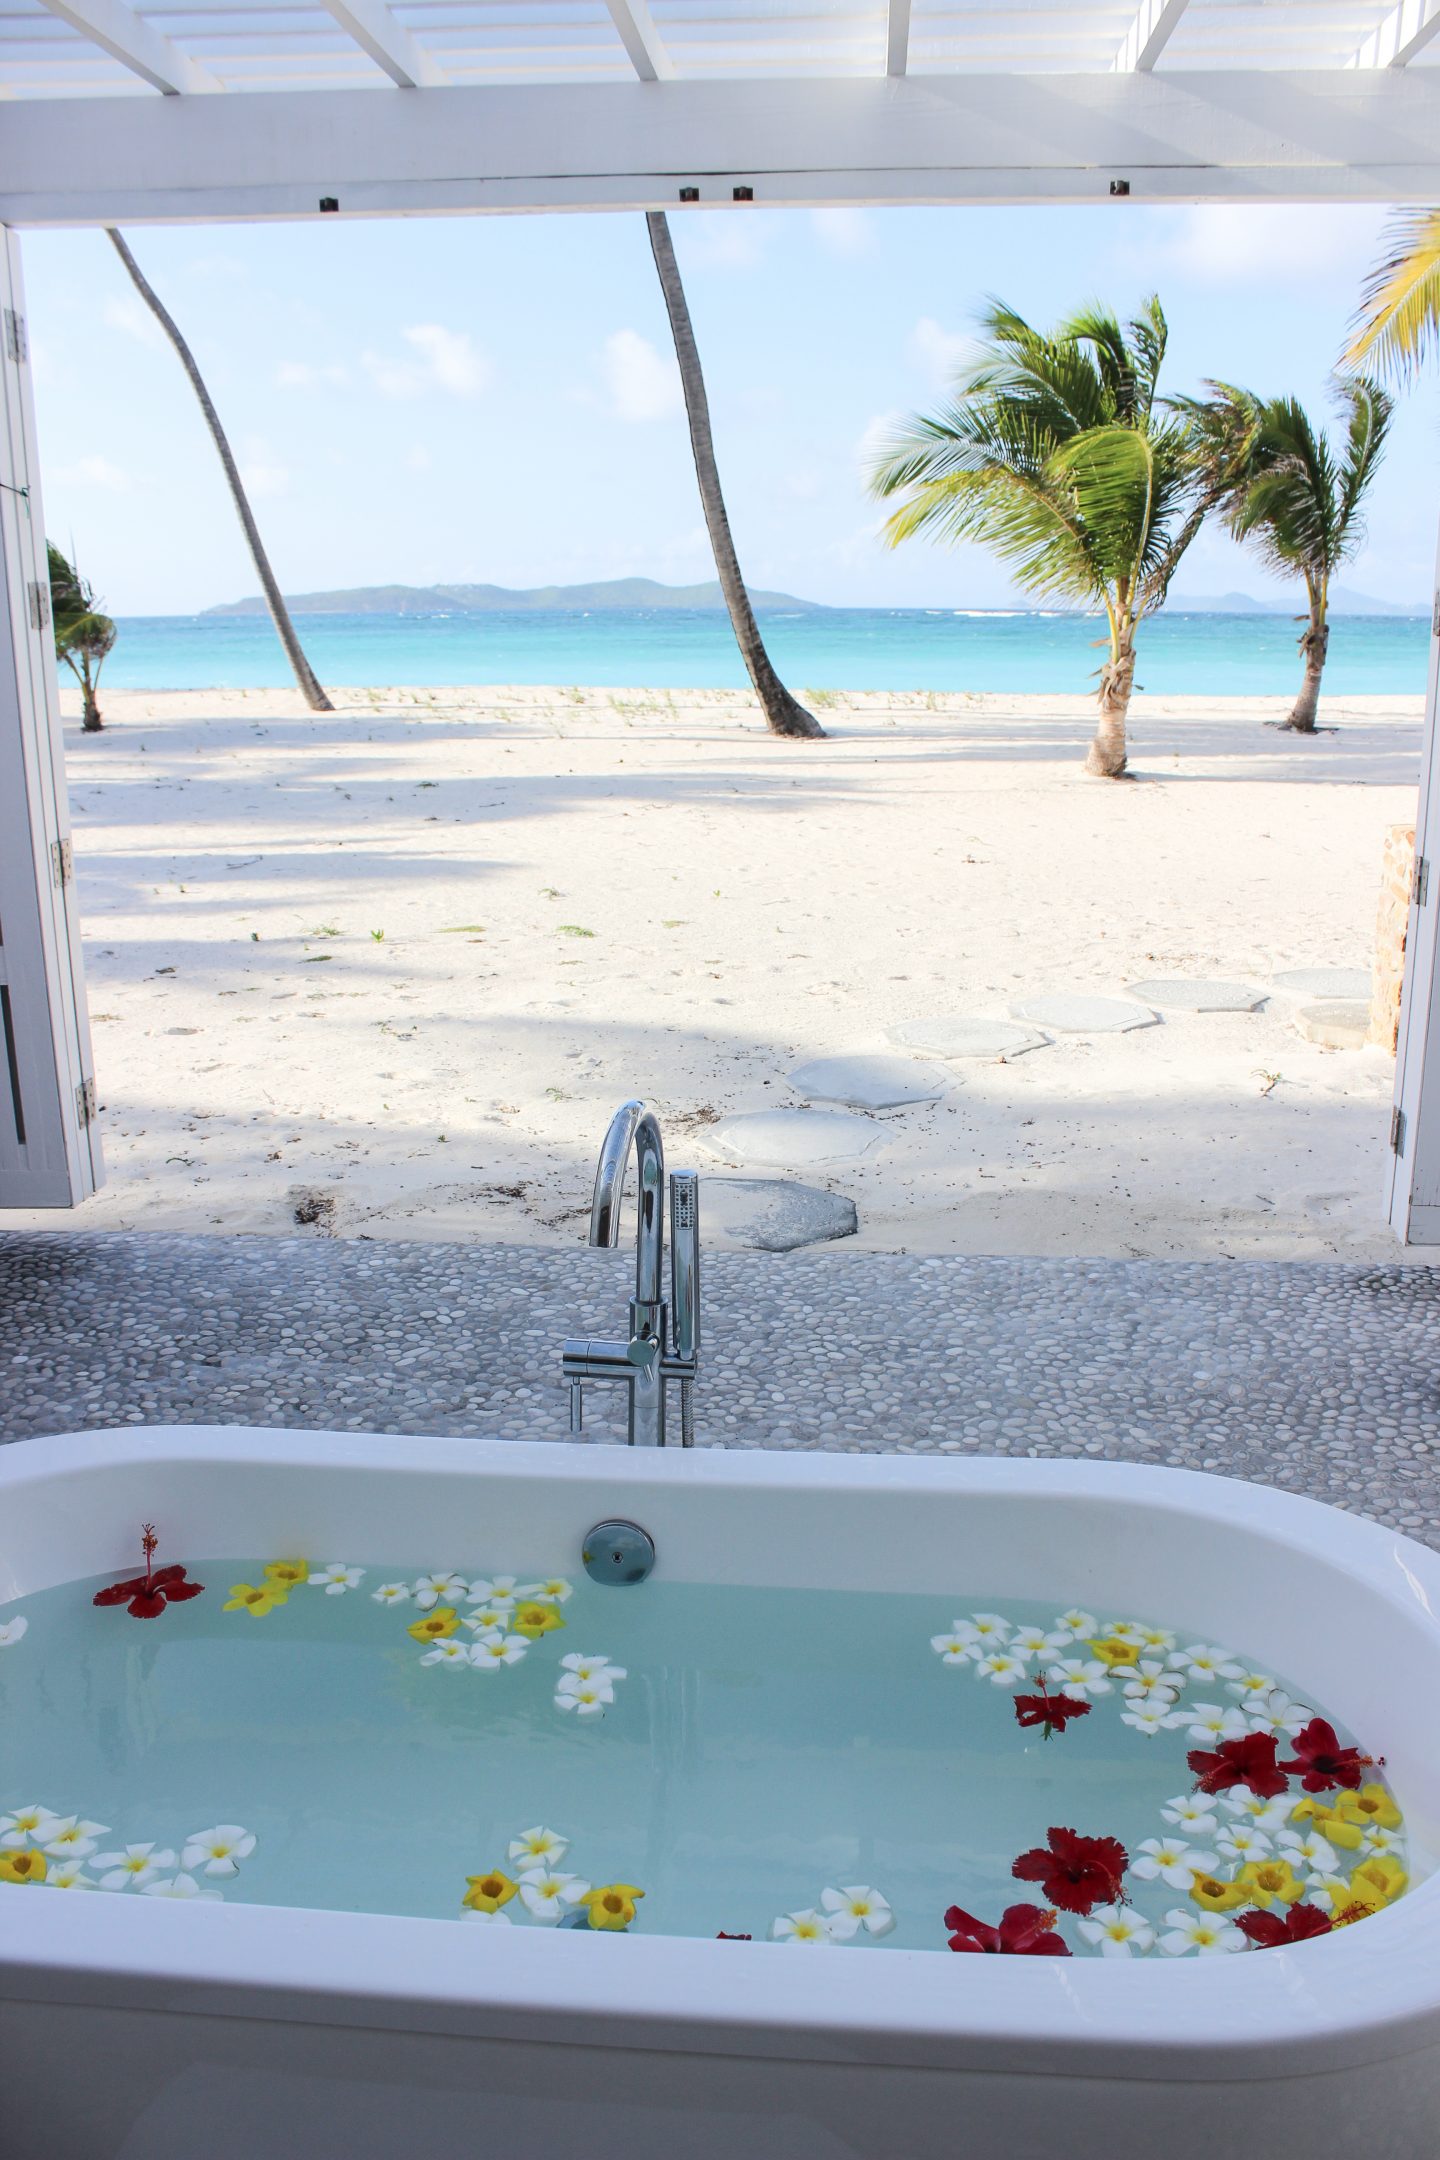 Clutch and carry on - UK Travel blogger - palm island resort, grenadines (338 of 361)